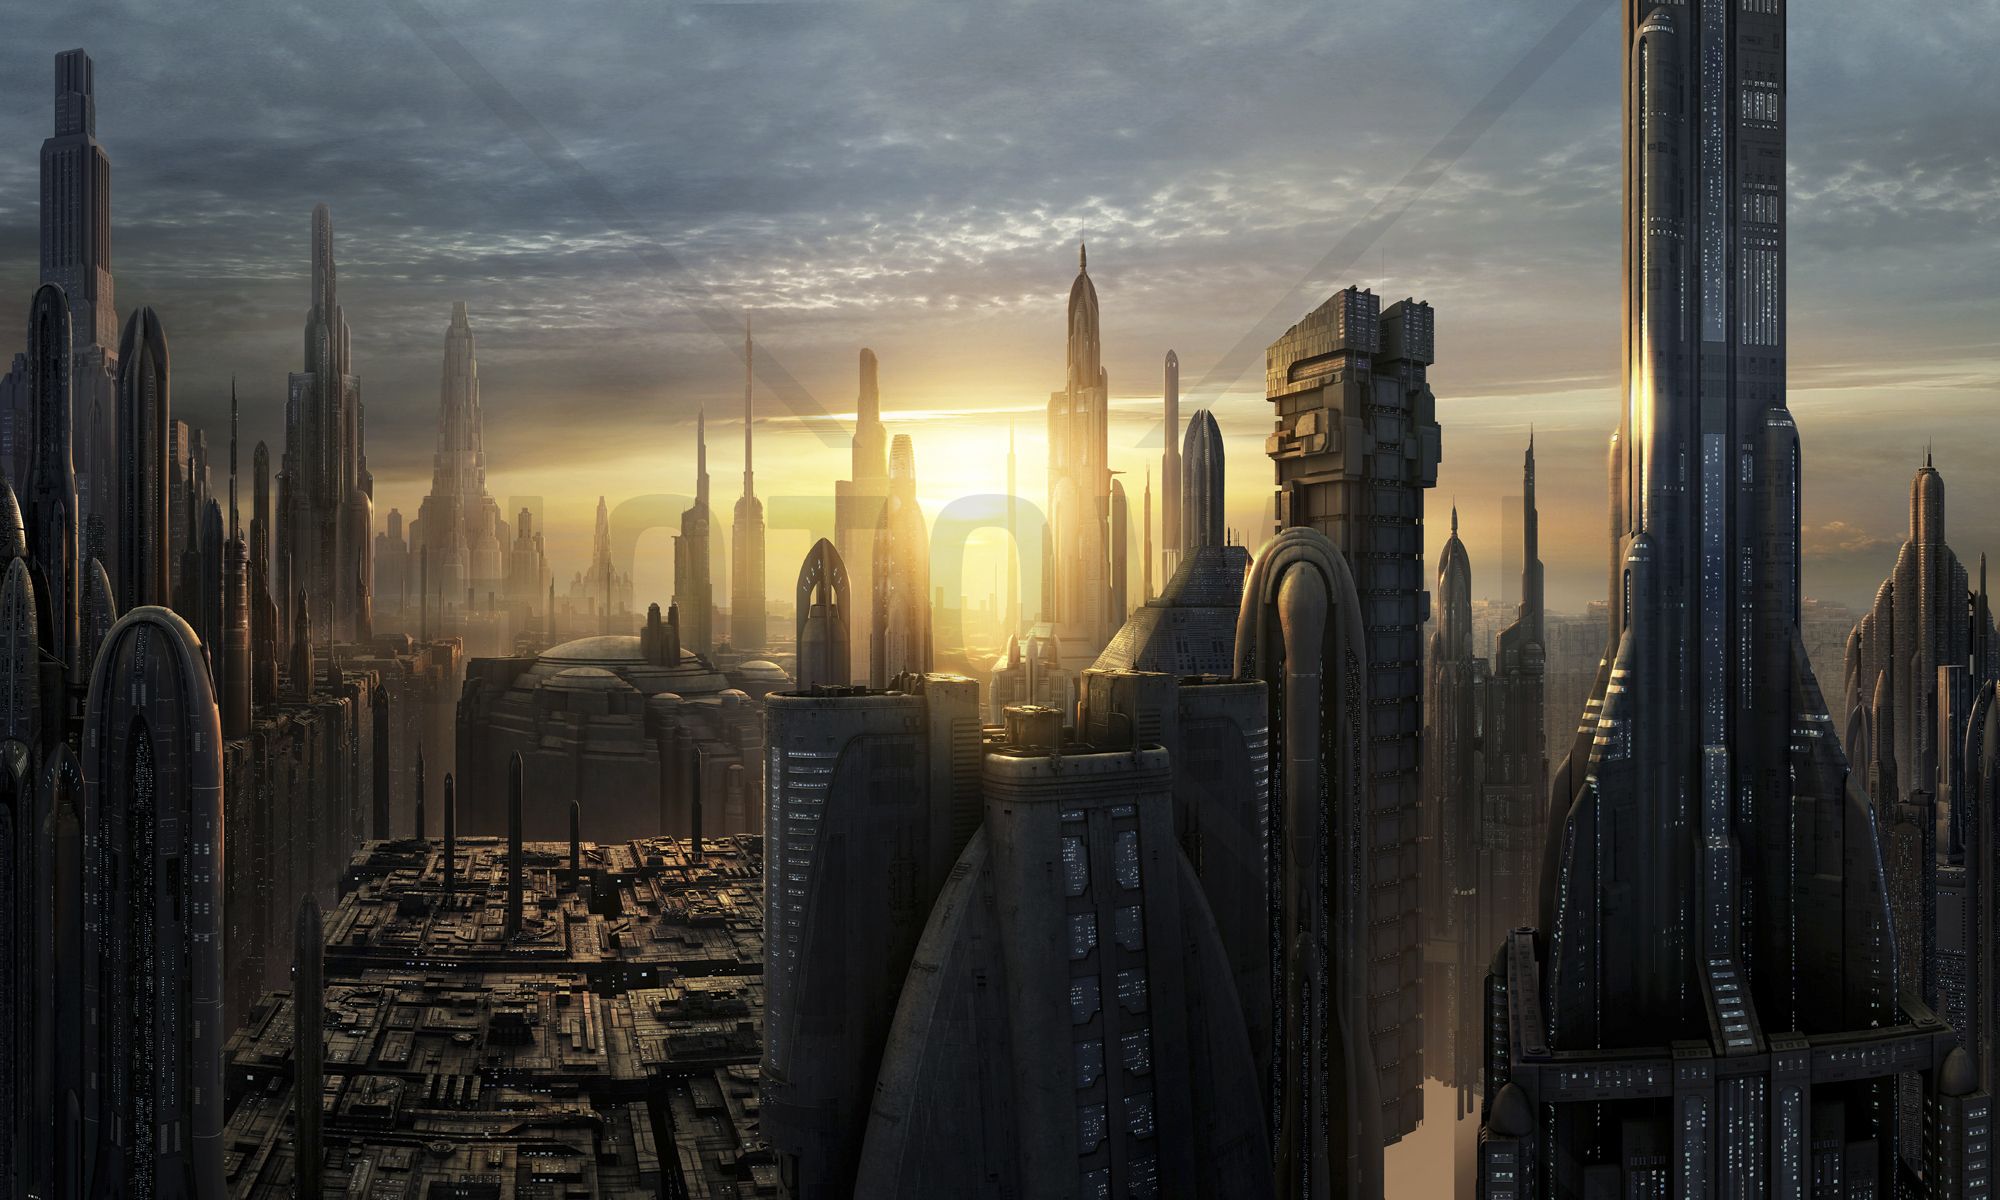 Star Wars - Coruscant Buildings Sunset - Wall Mural & Photo ...